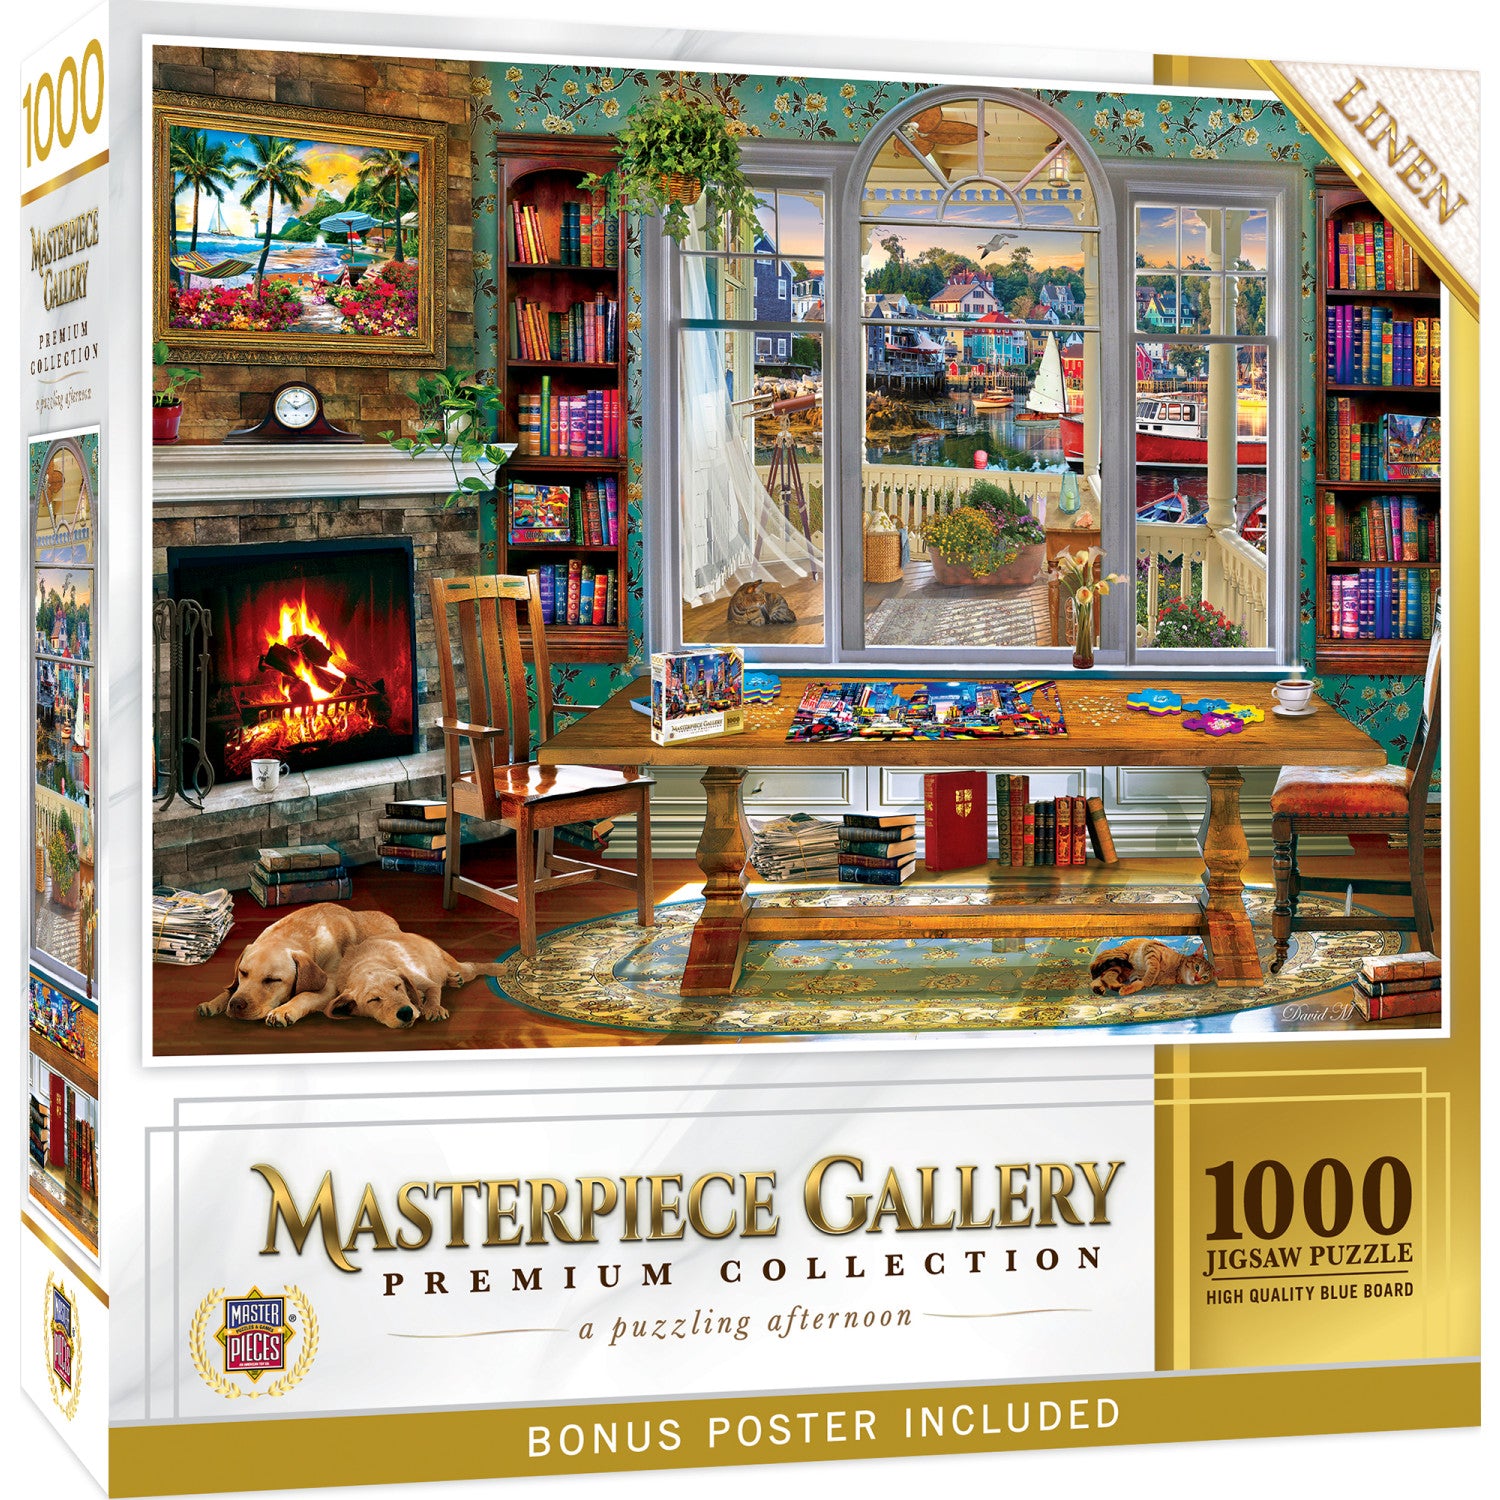 Masterpiece Gallery - A Puzzling Afternoon 1000 Piece Puzzle